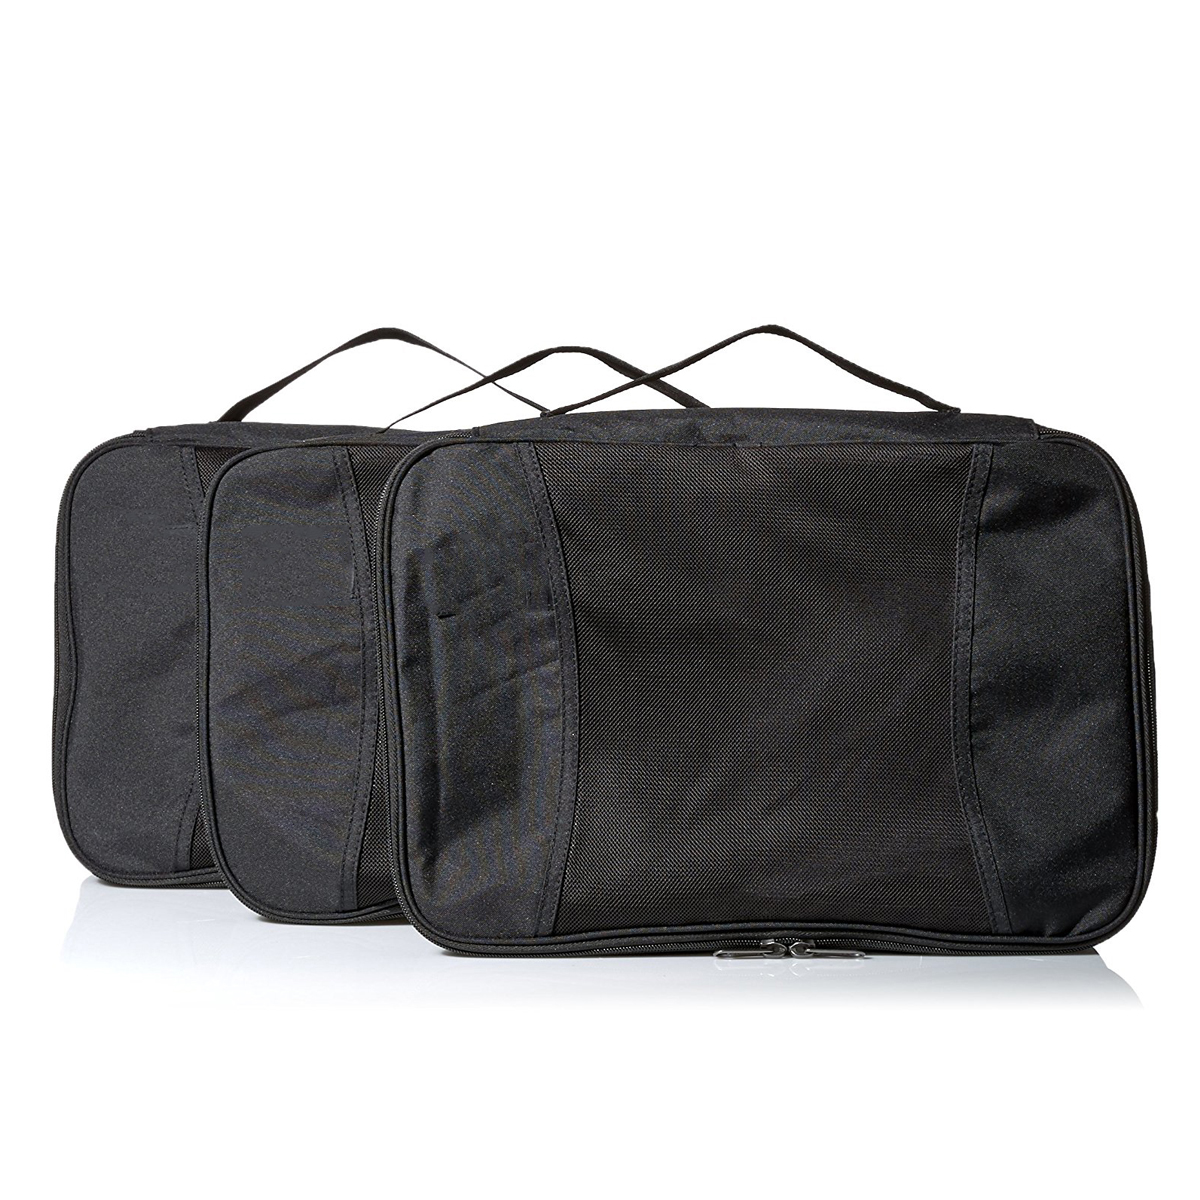 100% RPET 300D black packing cube for travelling